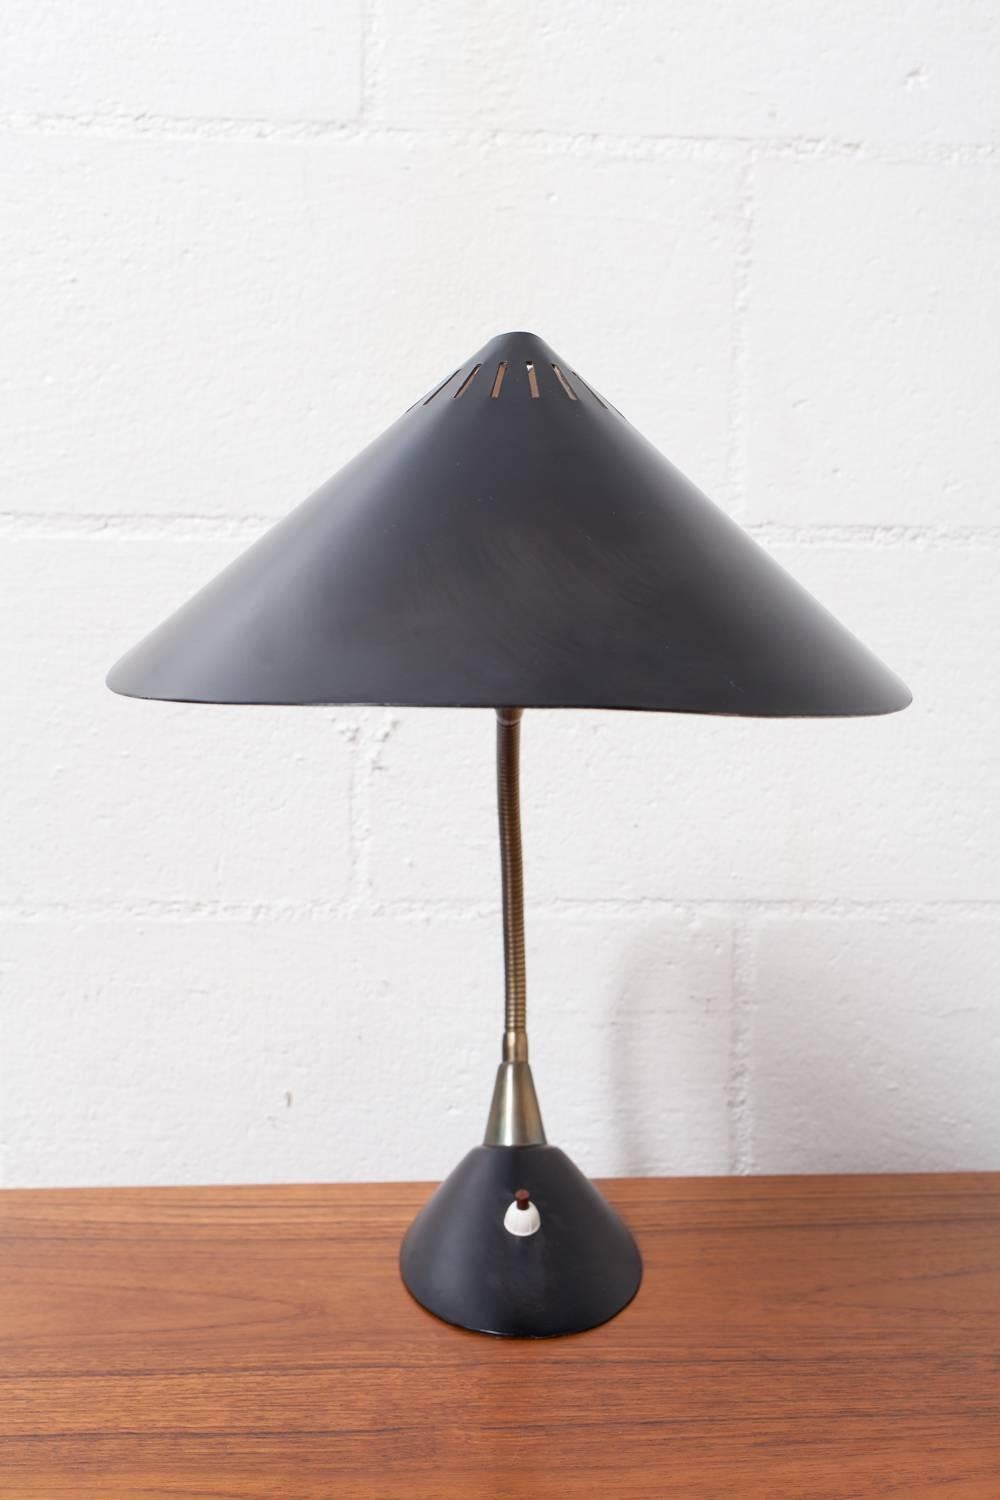 Black enameled metal leaf-shaped shade with line cut-outs. Adjustable brass goose neck with bakelite button on black enameled base. Some rusting/ discoloration inside shade due to age and wear.